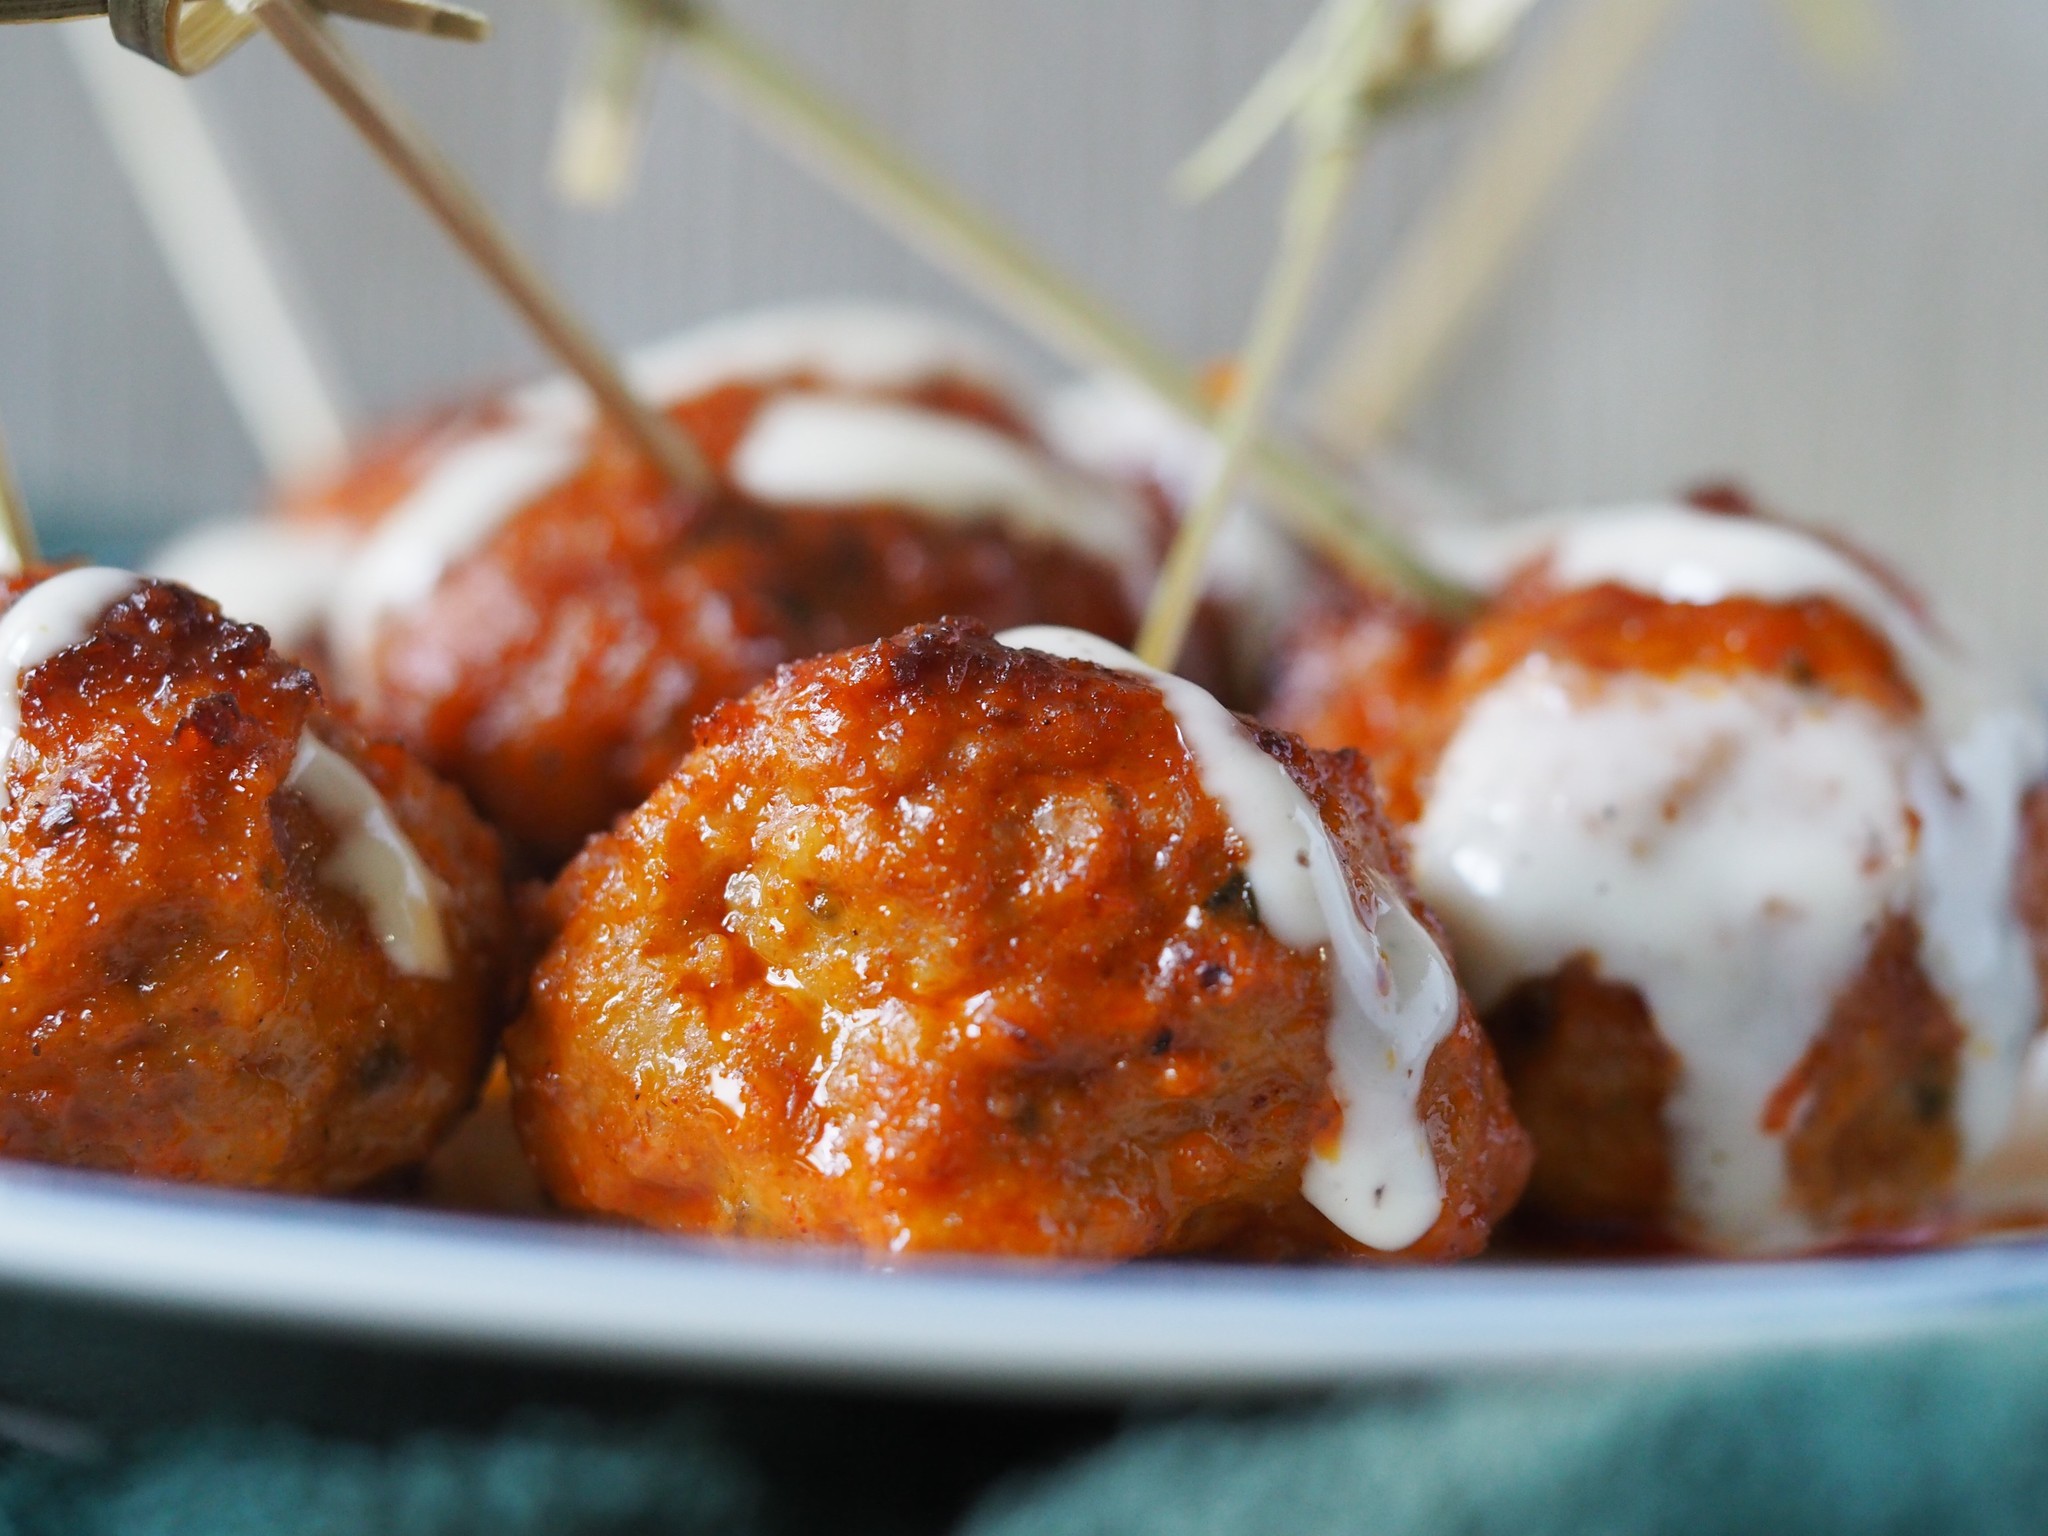 https://www.imore.com/sites/imore.com/files/styles/large/public/field/image/2019/01/monday-is-meatloaf-instant-pot-no-fail-buffalo-chicken-meatballs.jpg?itok=MSJXiT2f